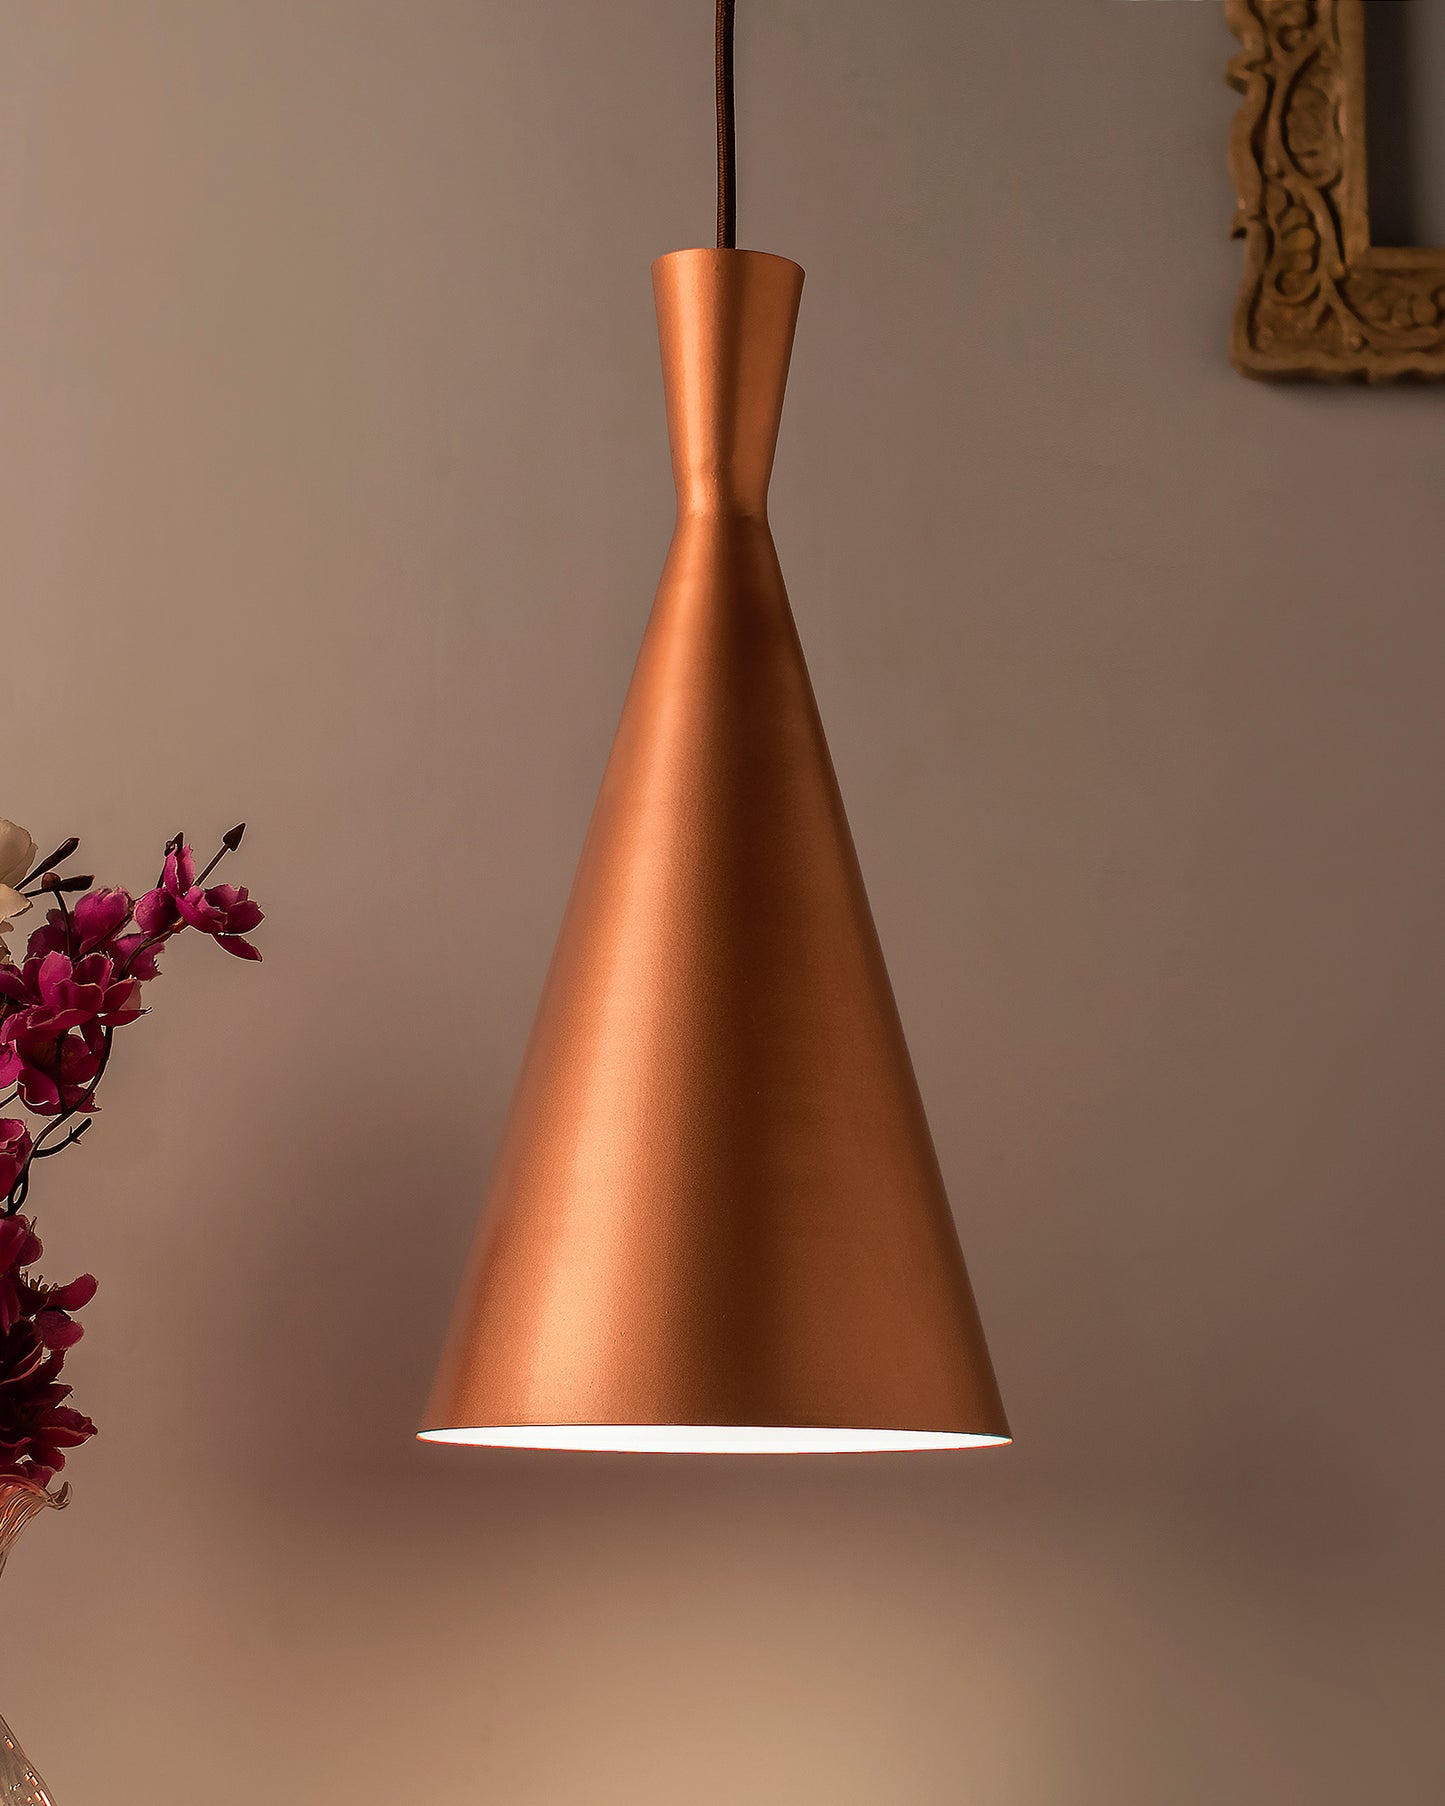 Modern Hanging Light, E26/27 Nordic Pendant Lamp, Inverted Cone Shaped Kitchen, Bedroom, Living Room Ceiling Lamp